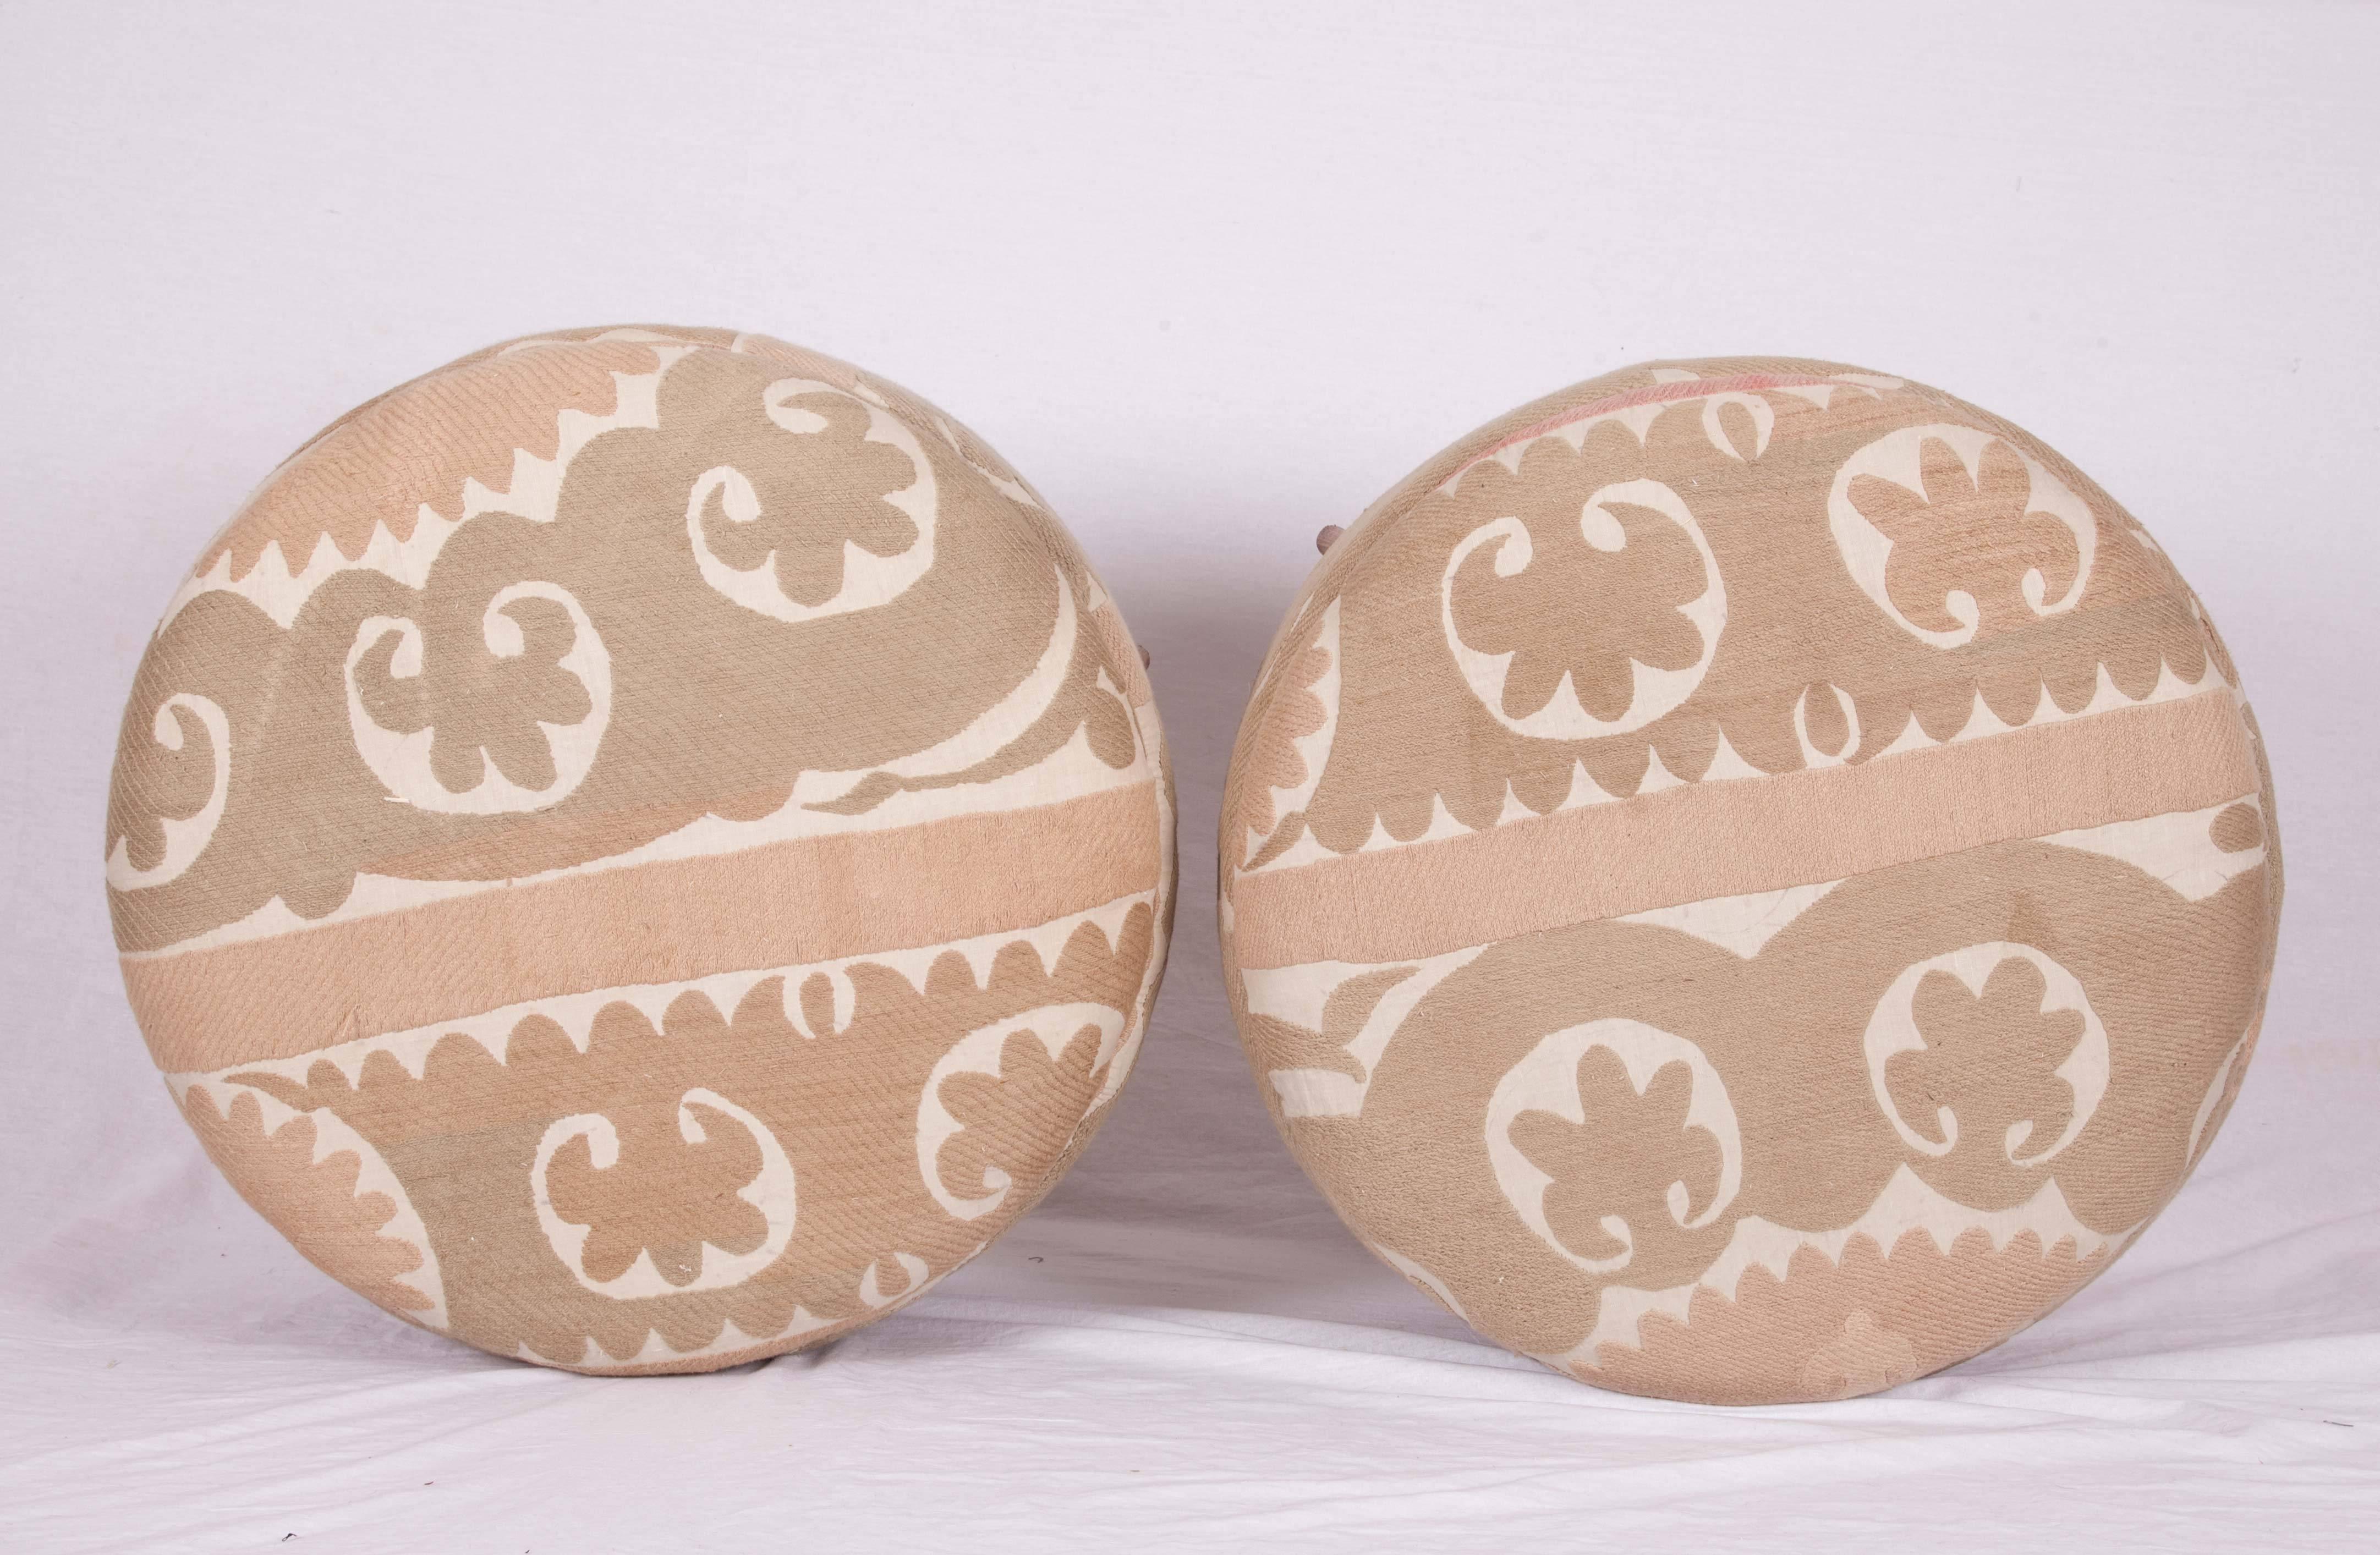 Embroidered Ottoman or Poufs Fashioned from a Mid-20th Century Samarkand Cotton Suzani